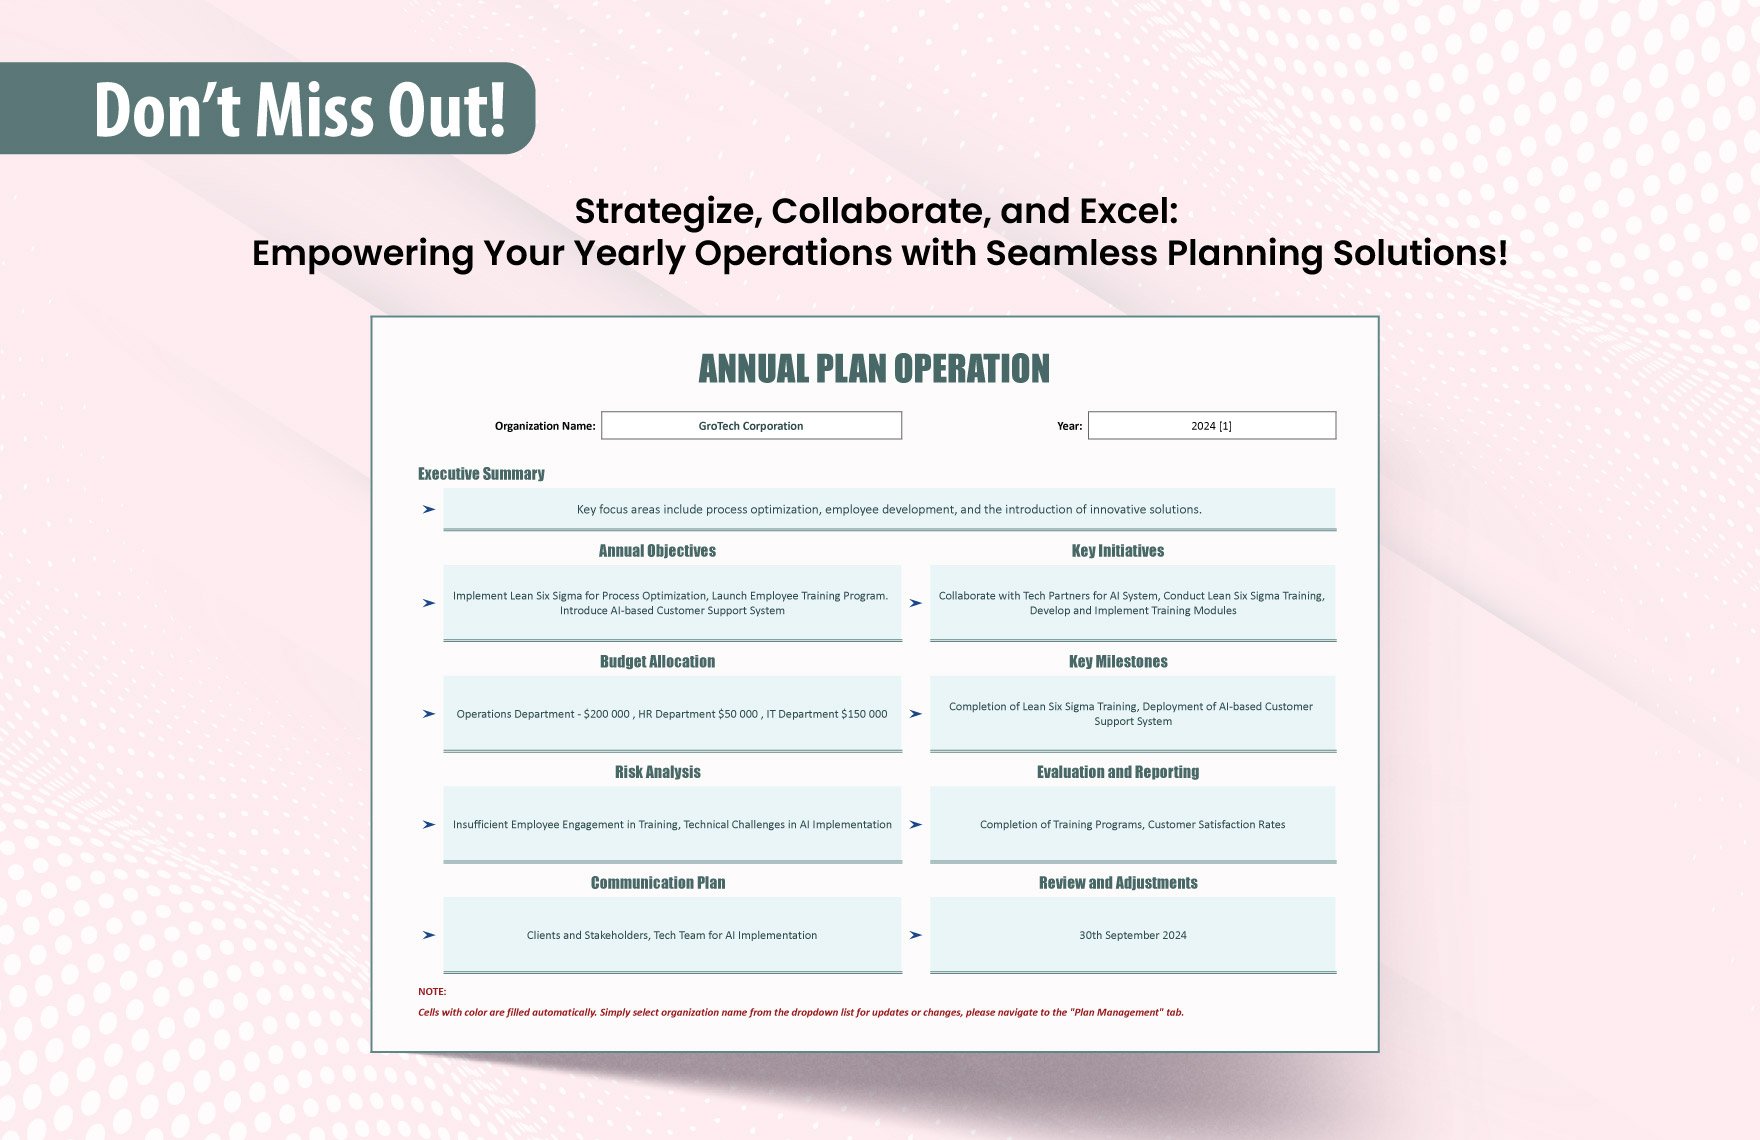 Annual Plan Operation Template